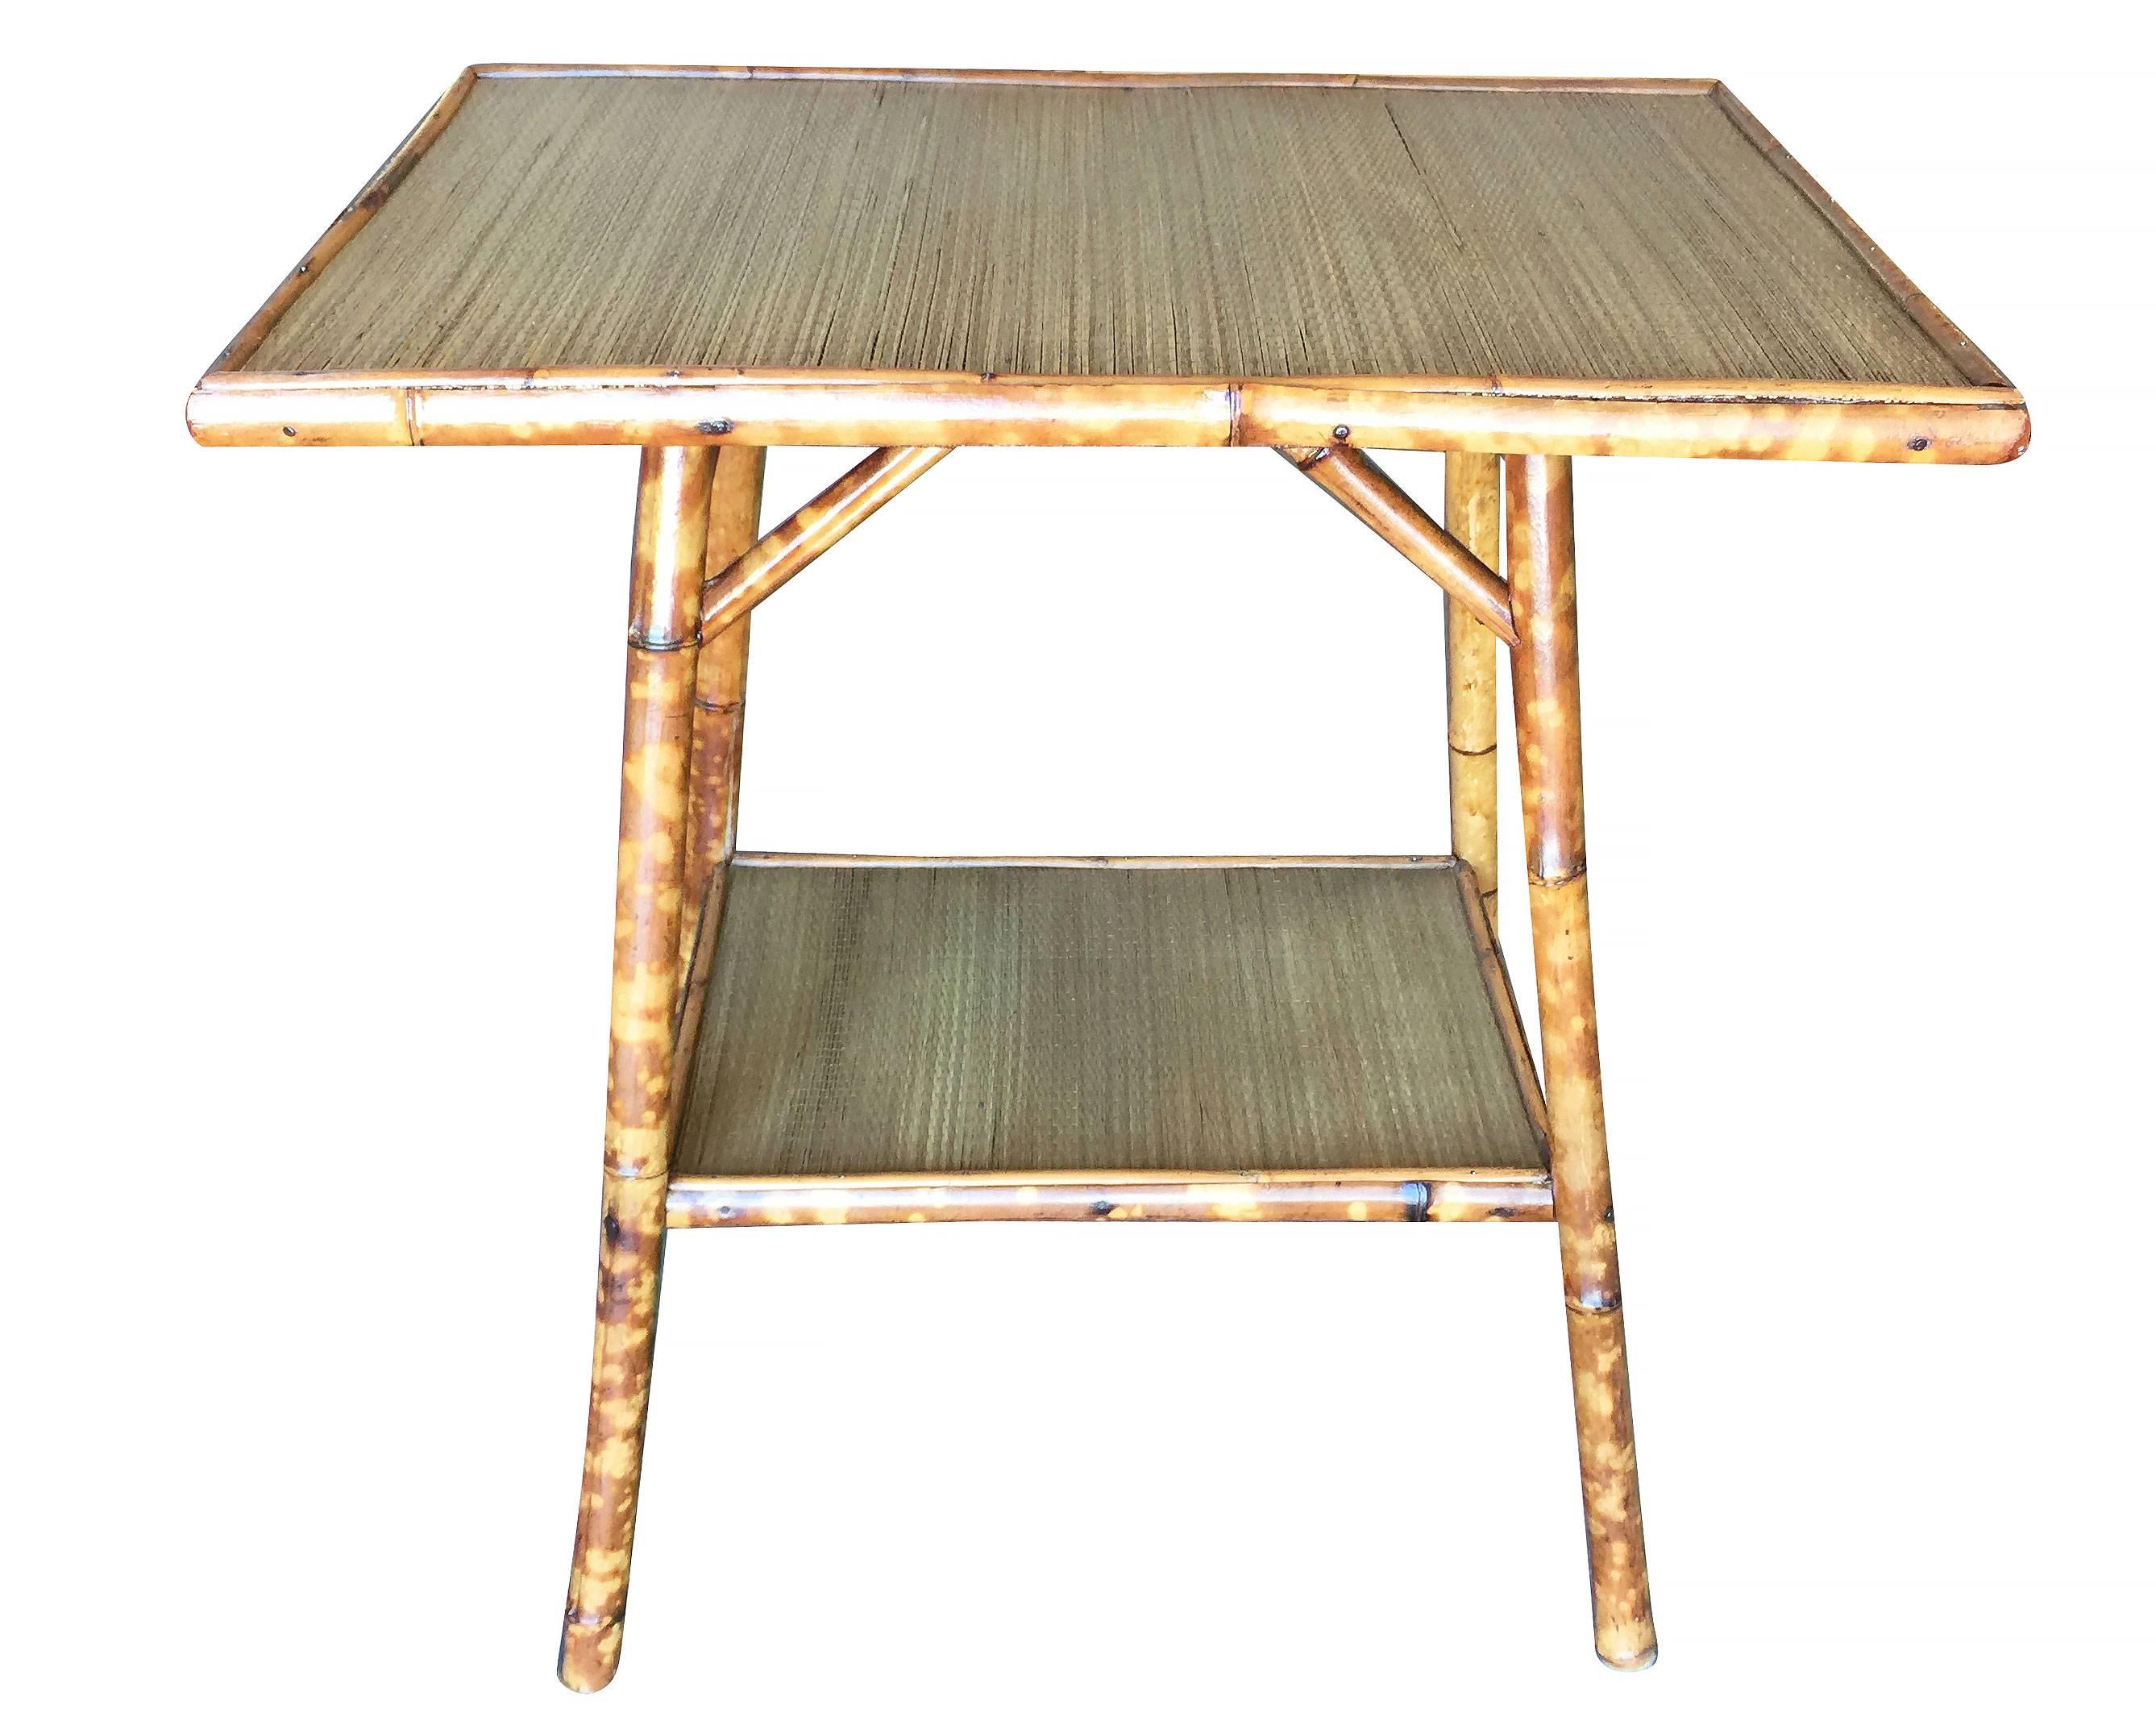 Antique Ascetically Movement tiger bamboo pedestal side table with rice mat top and secondary bottom shelf.

Restored to new for you.

All rattan, bamboo and wicker furniture has been painstakingly refurbished to the highest standards with the best